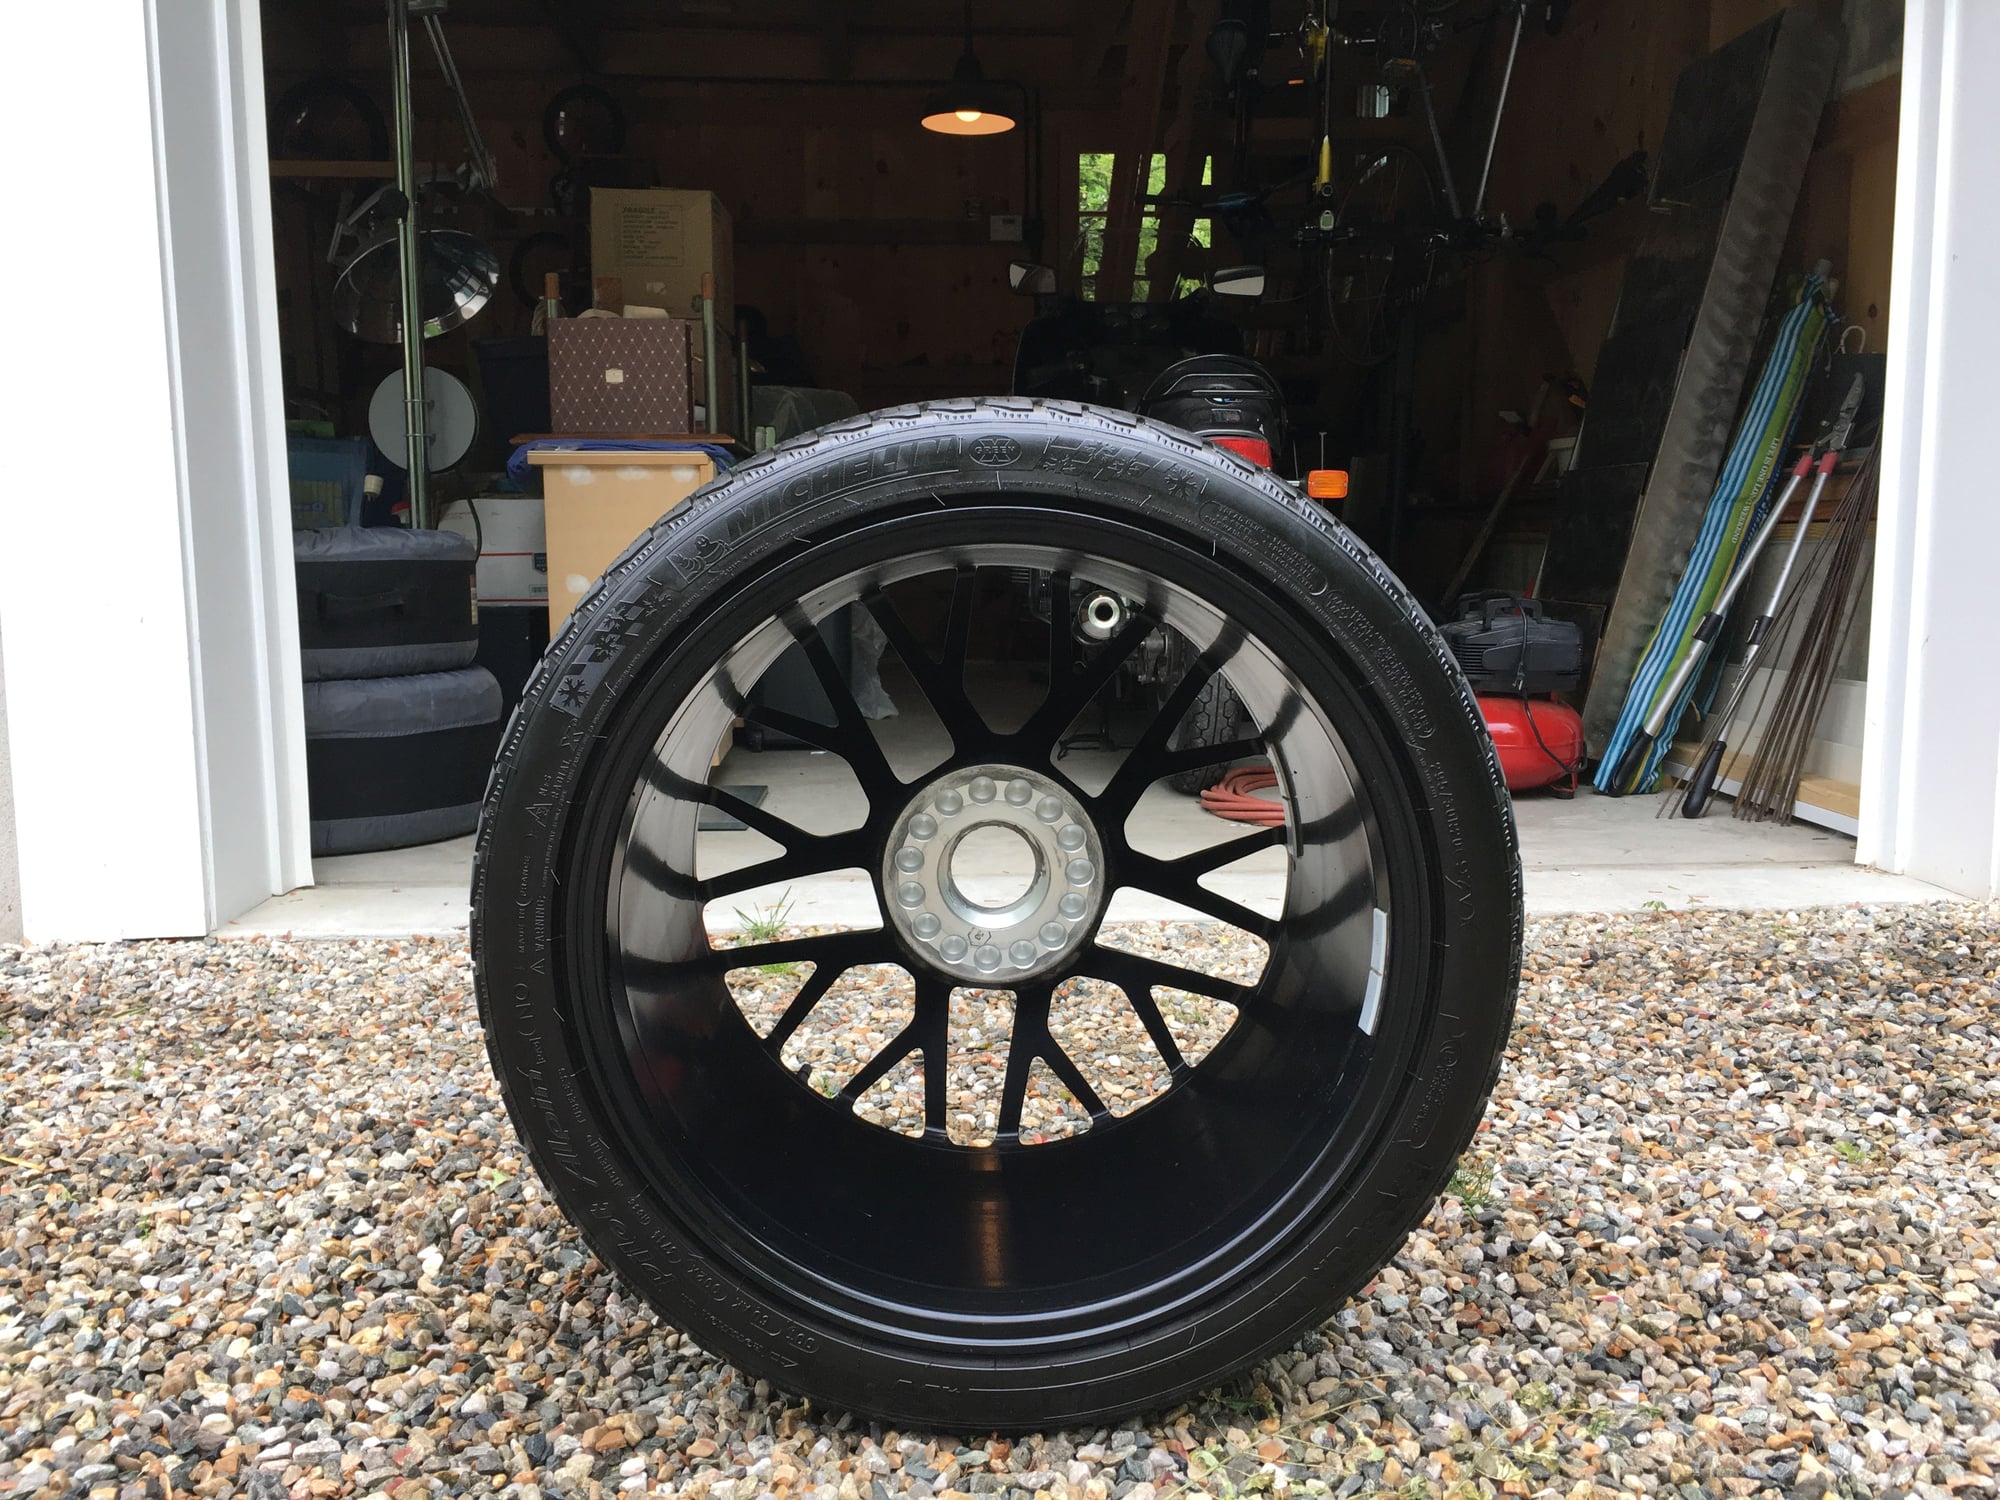 Wheels and Tires/Axles - GT3 Winter Wheels & Tires - Used - 2014 to 2019 Porsche GT3 - Westport, CT 06880, United States